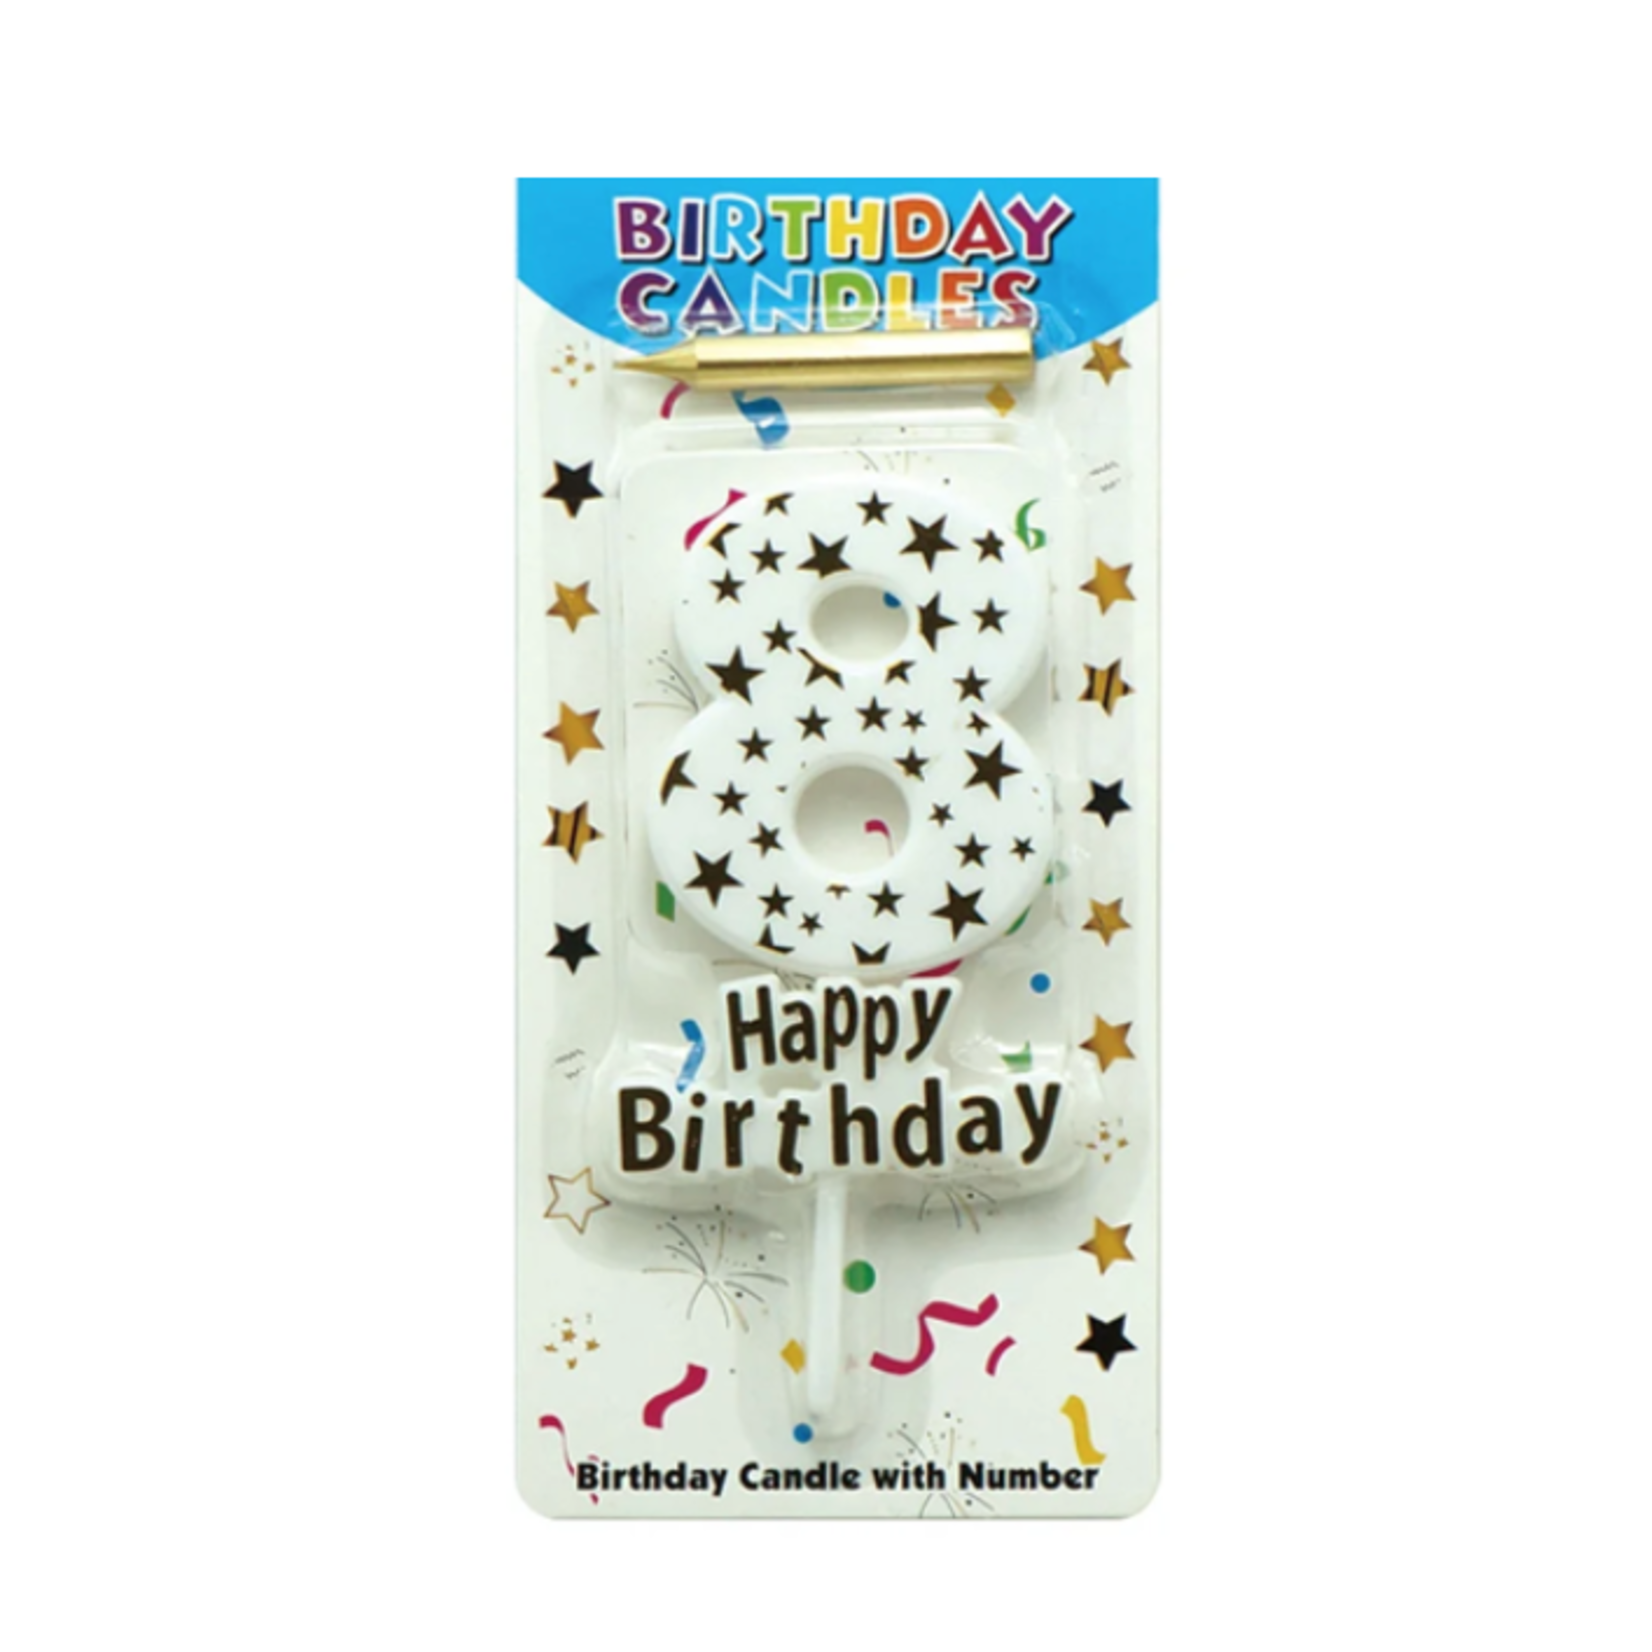 HAPPY BIRTHDAY CANDLE #8 WHITE WITH GOLD STARS